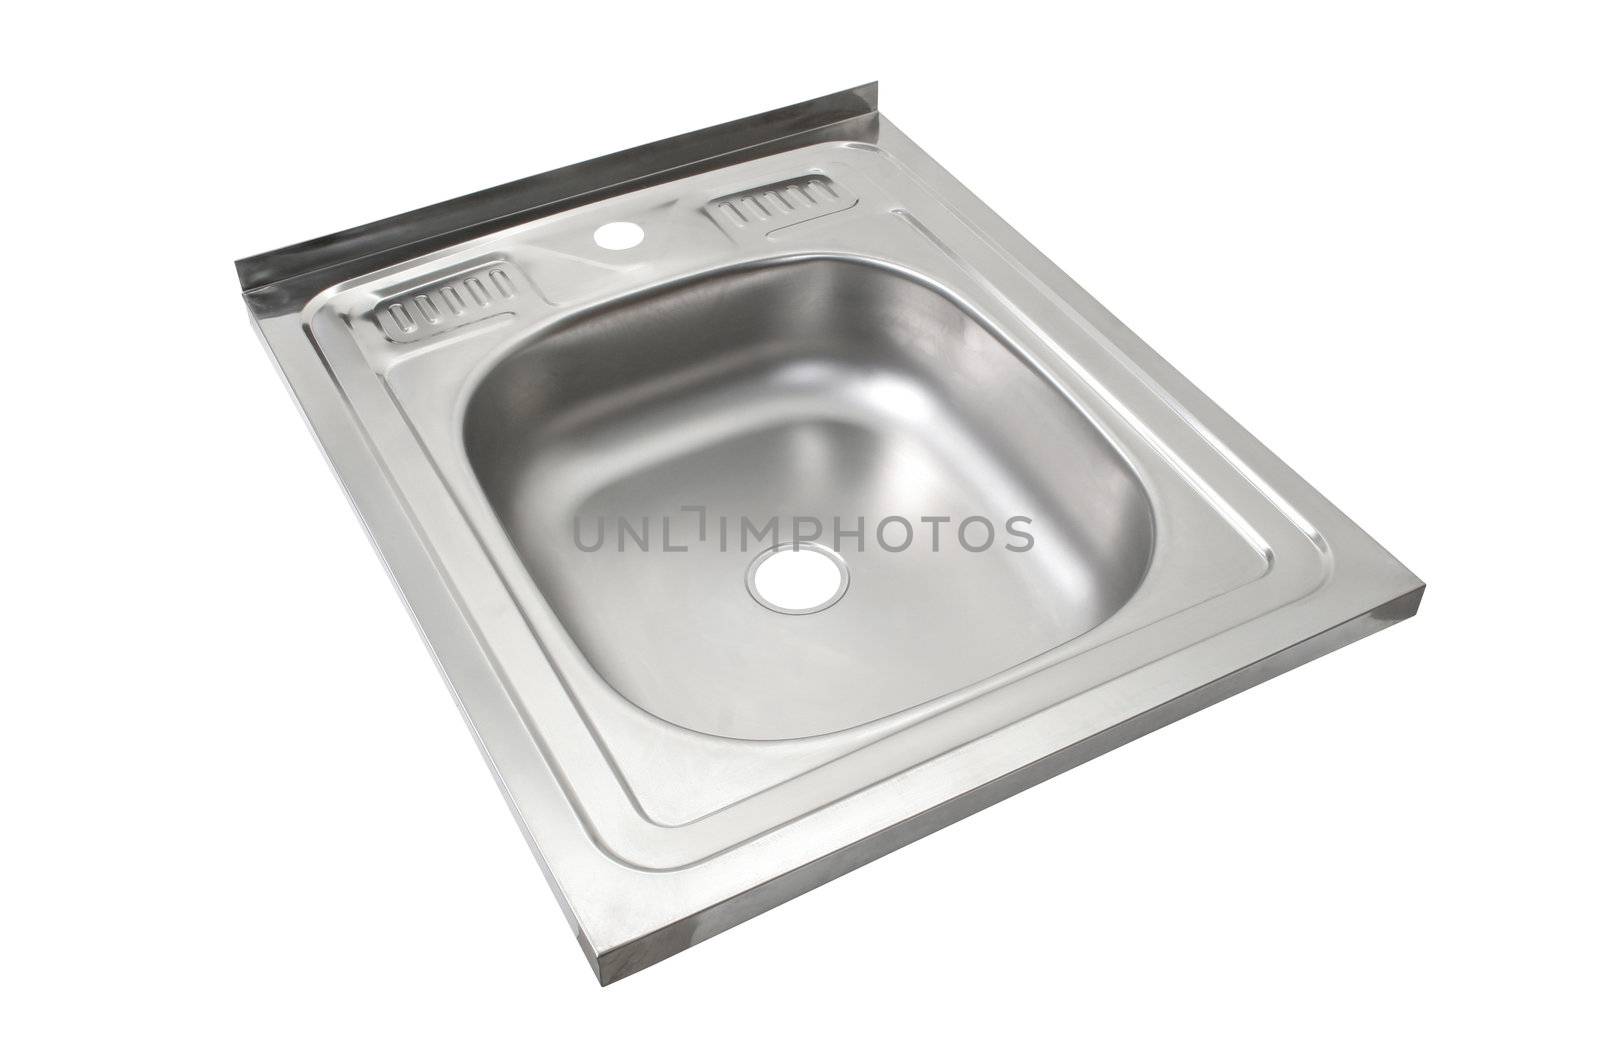 Kitchen sink file - includes clipping path by igor_stramyk